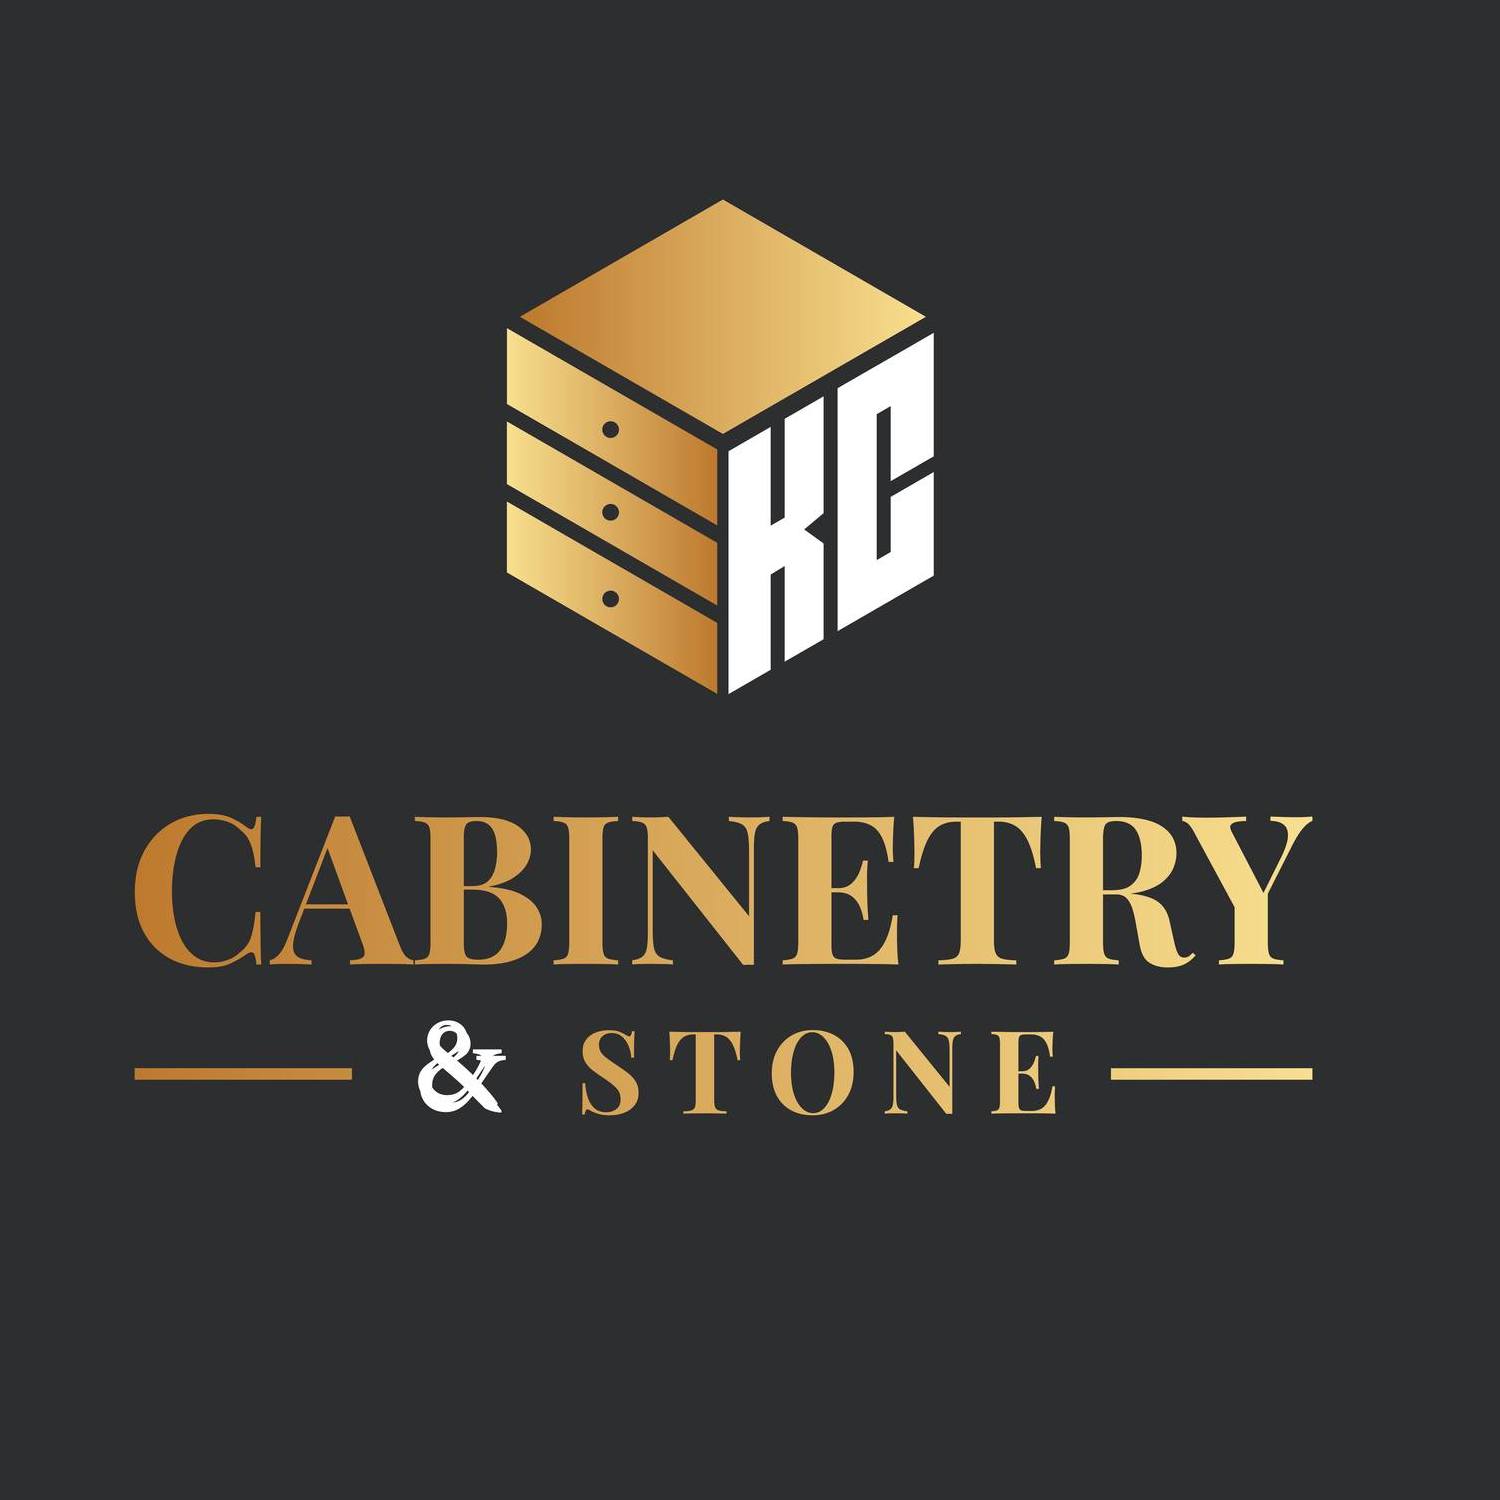 KC Cabinetry And Stone Is Delighted To Announce An Expansion in Their Range of Countertops in Kansas City